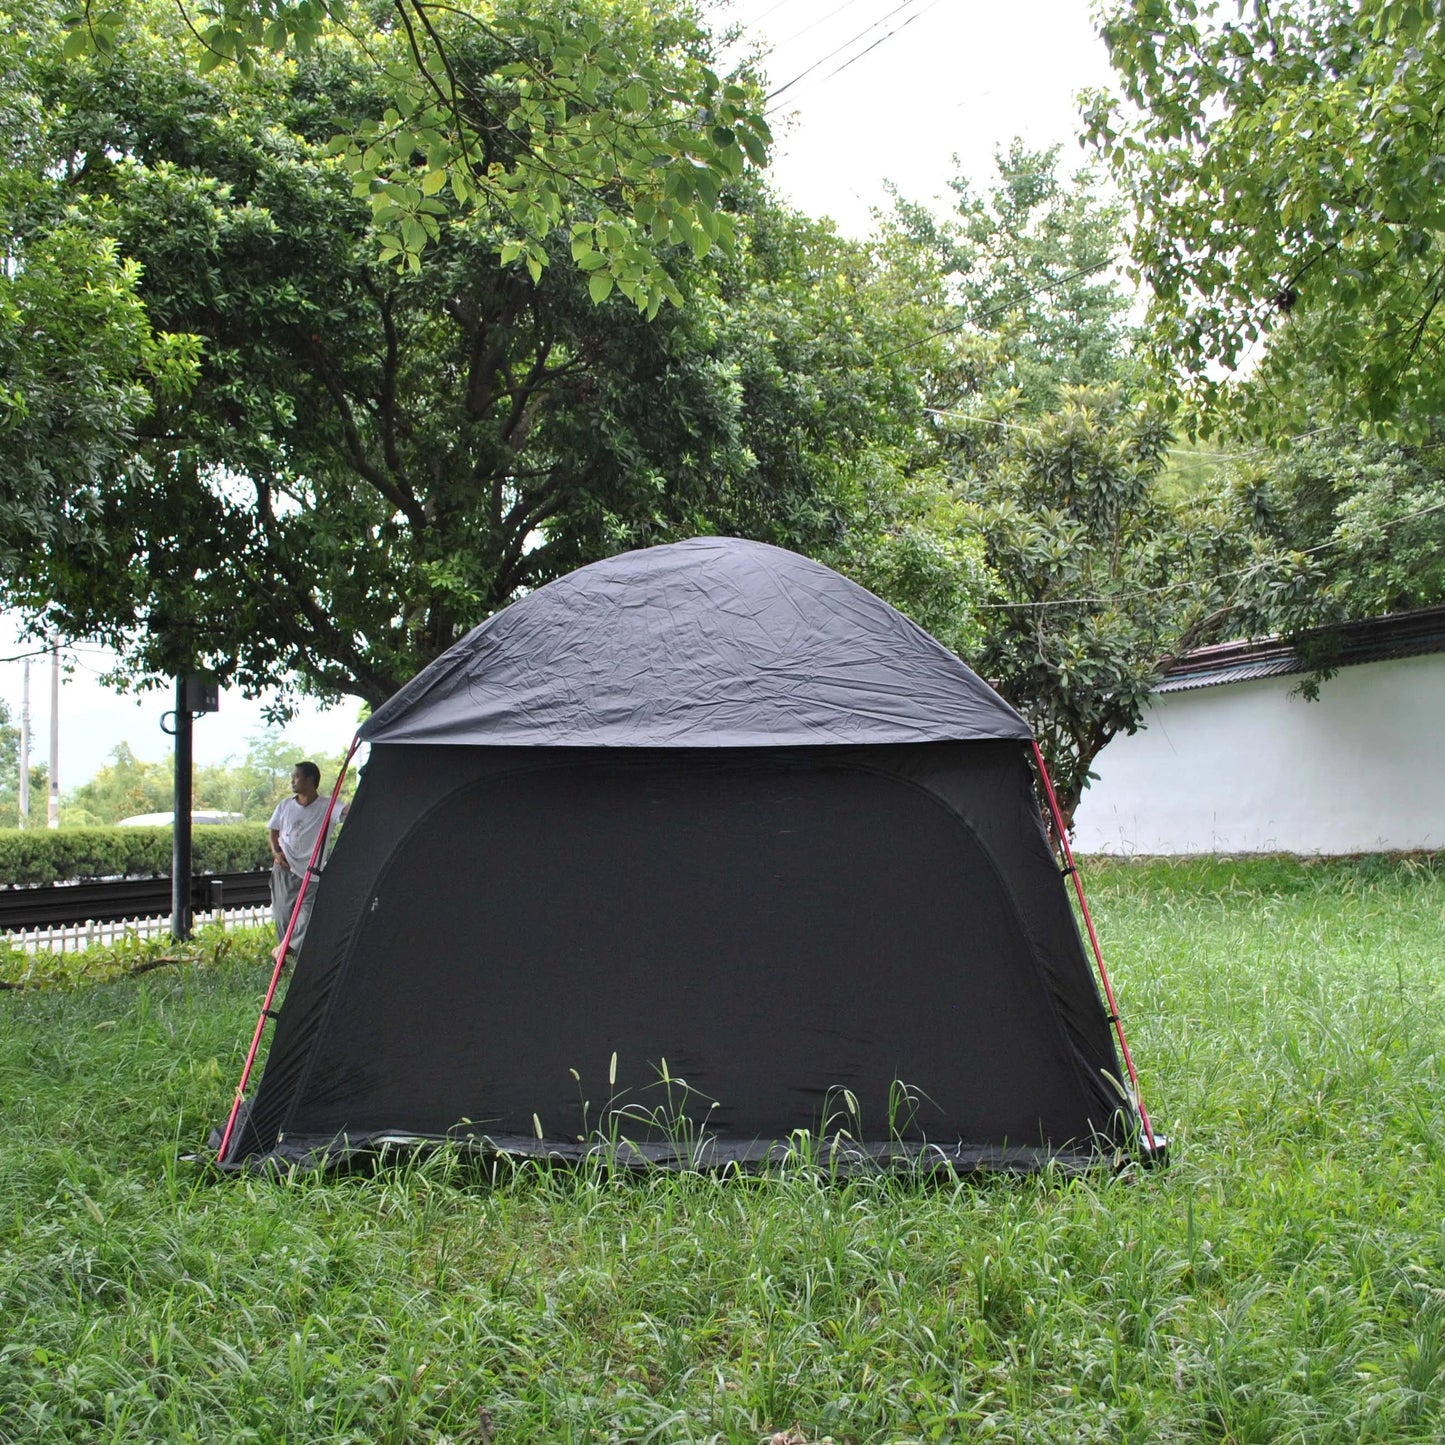 High quaity 6 person luxury tent,6 Person Dome tent for Famiy tent,6 Person Glamping tent,big dome temt with 4 doors